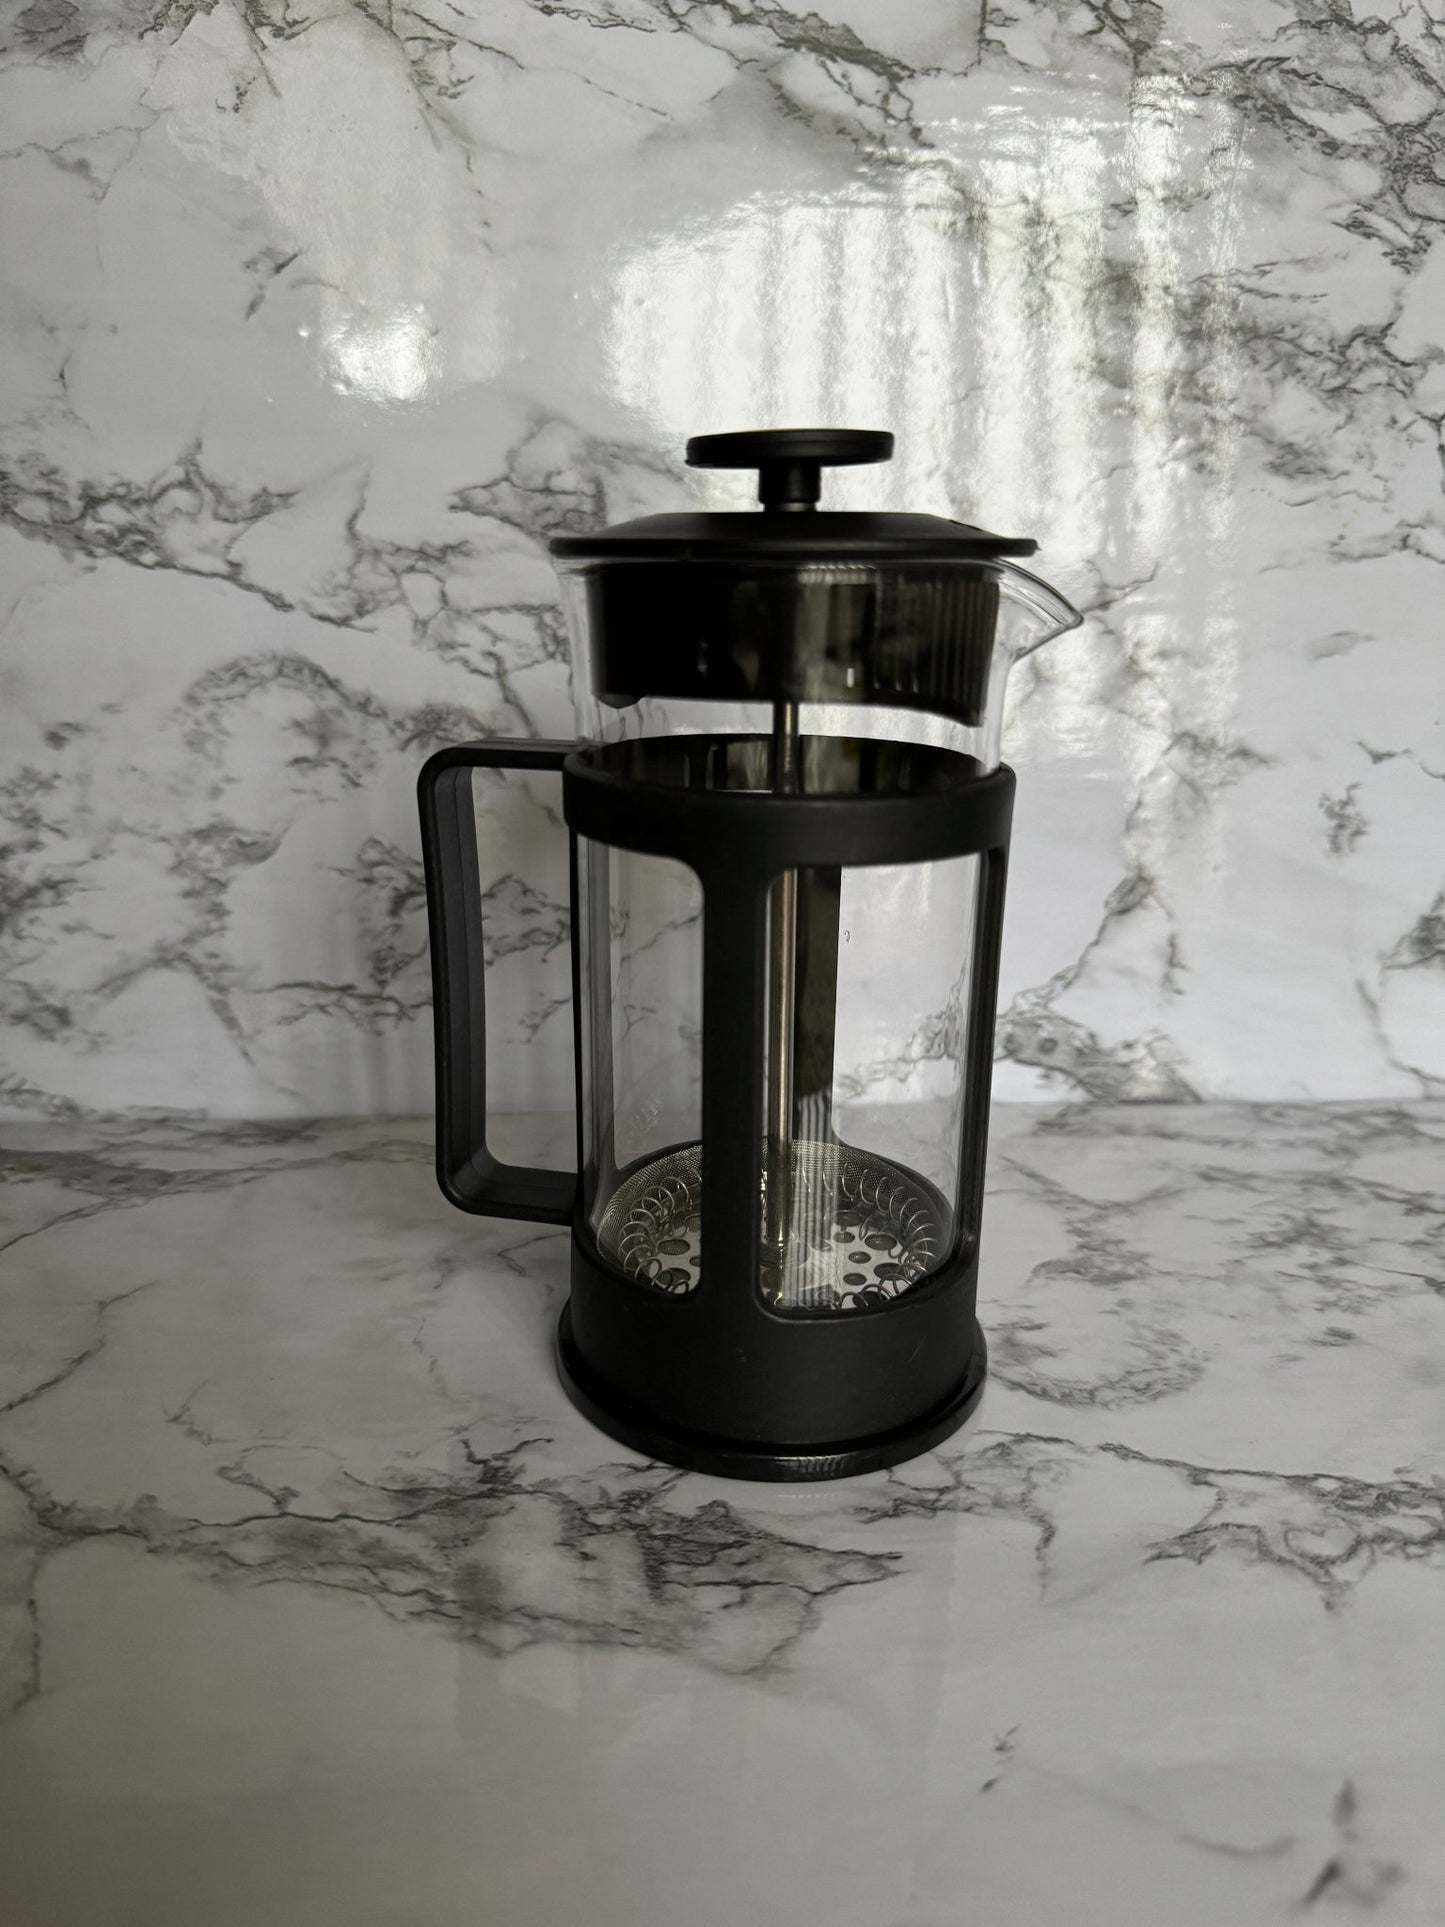 French Press 350 mL - Boots on ground coffee co